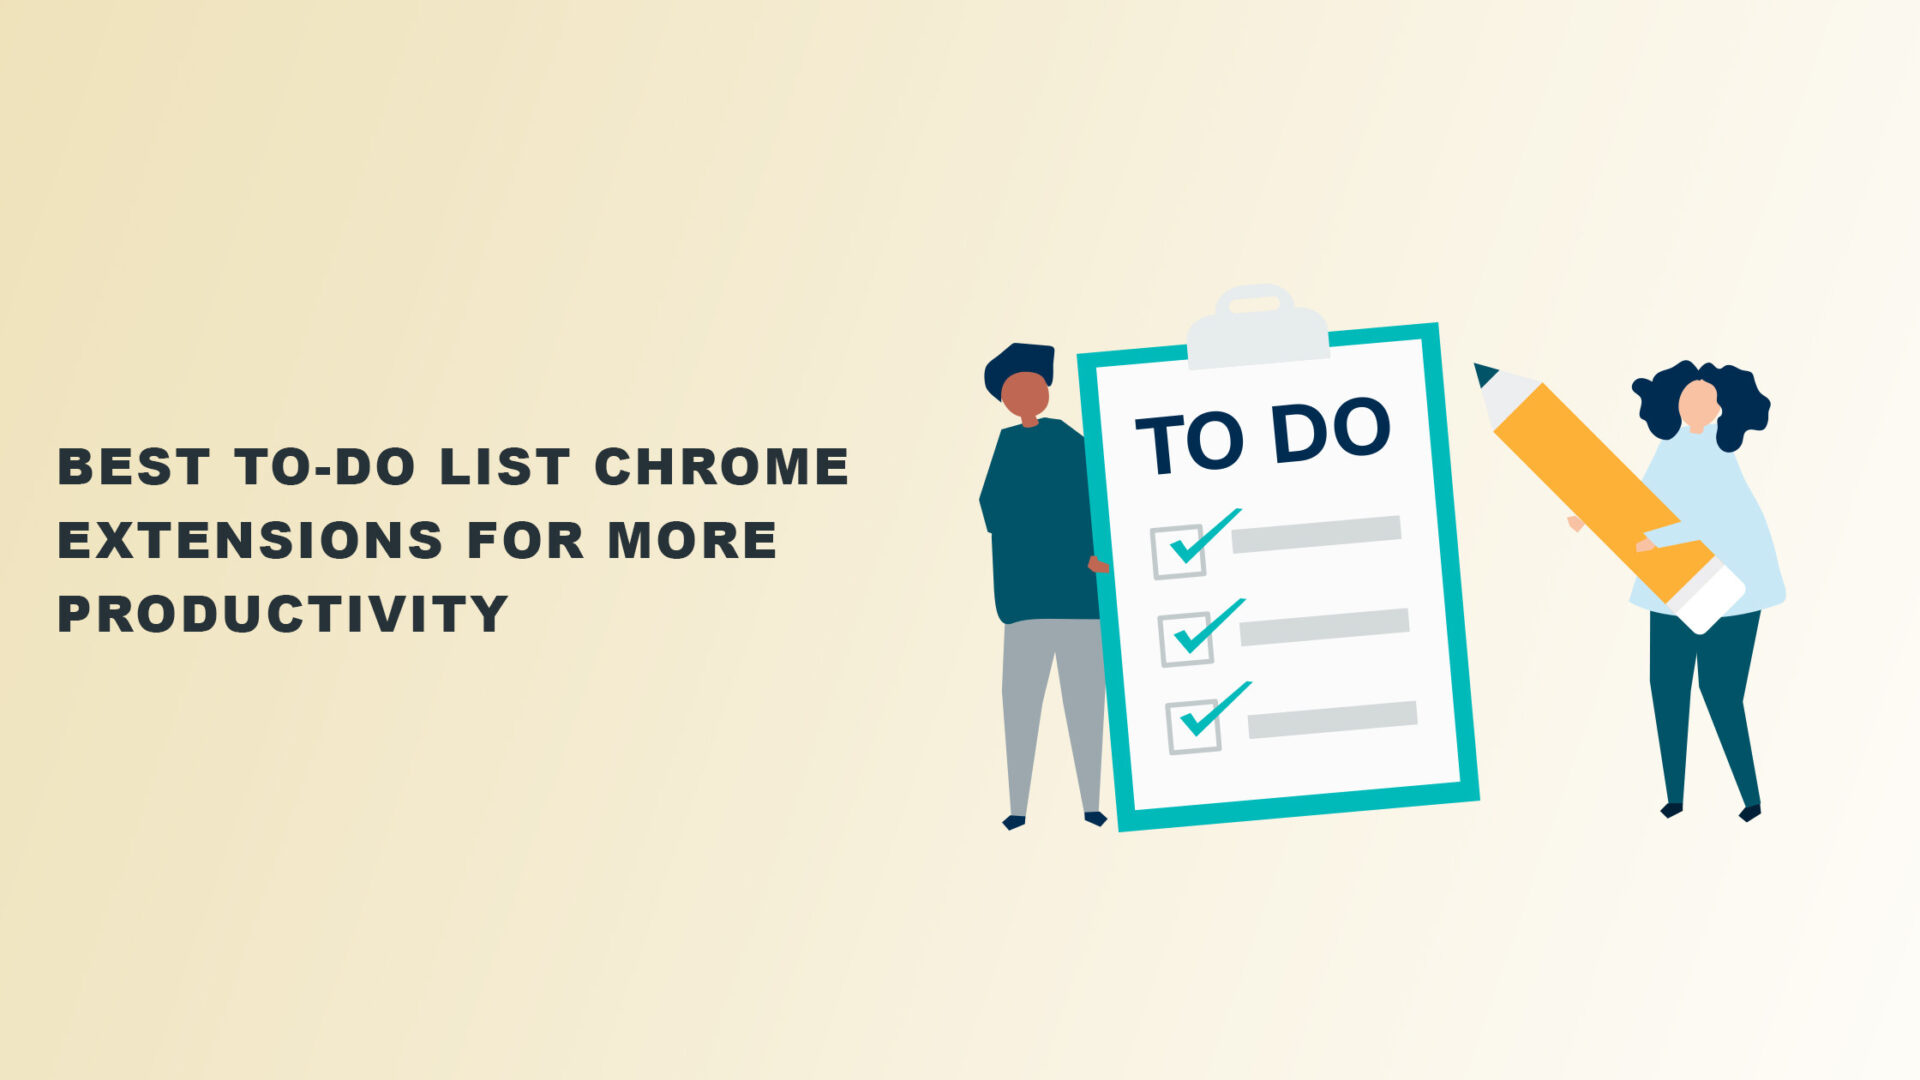 Best To-Do List Chrome Extensions for More Productivity